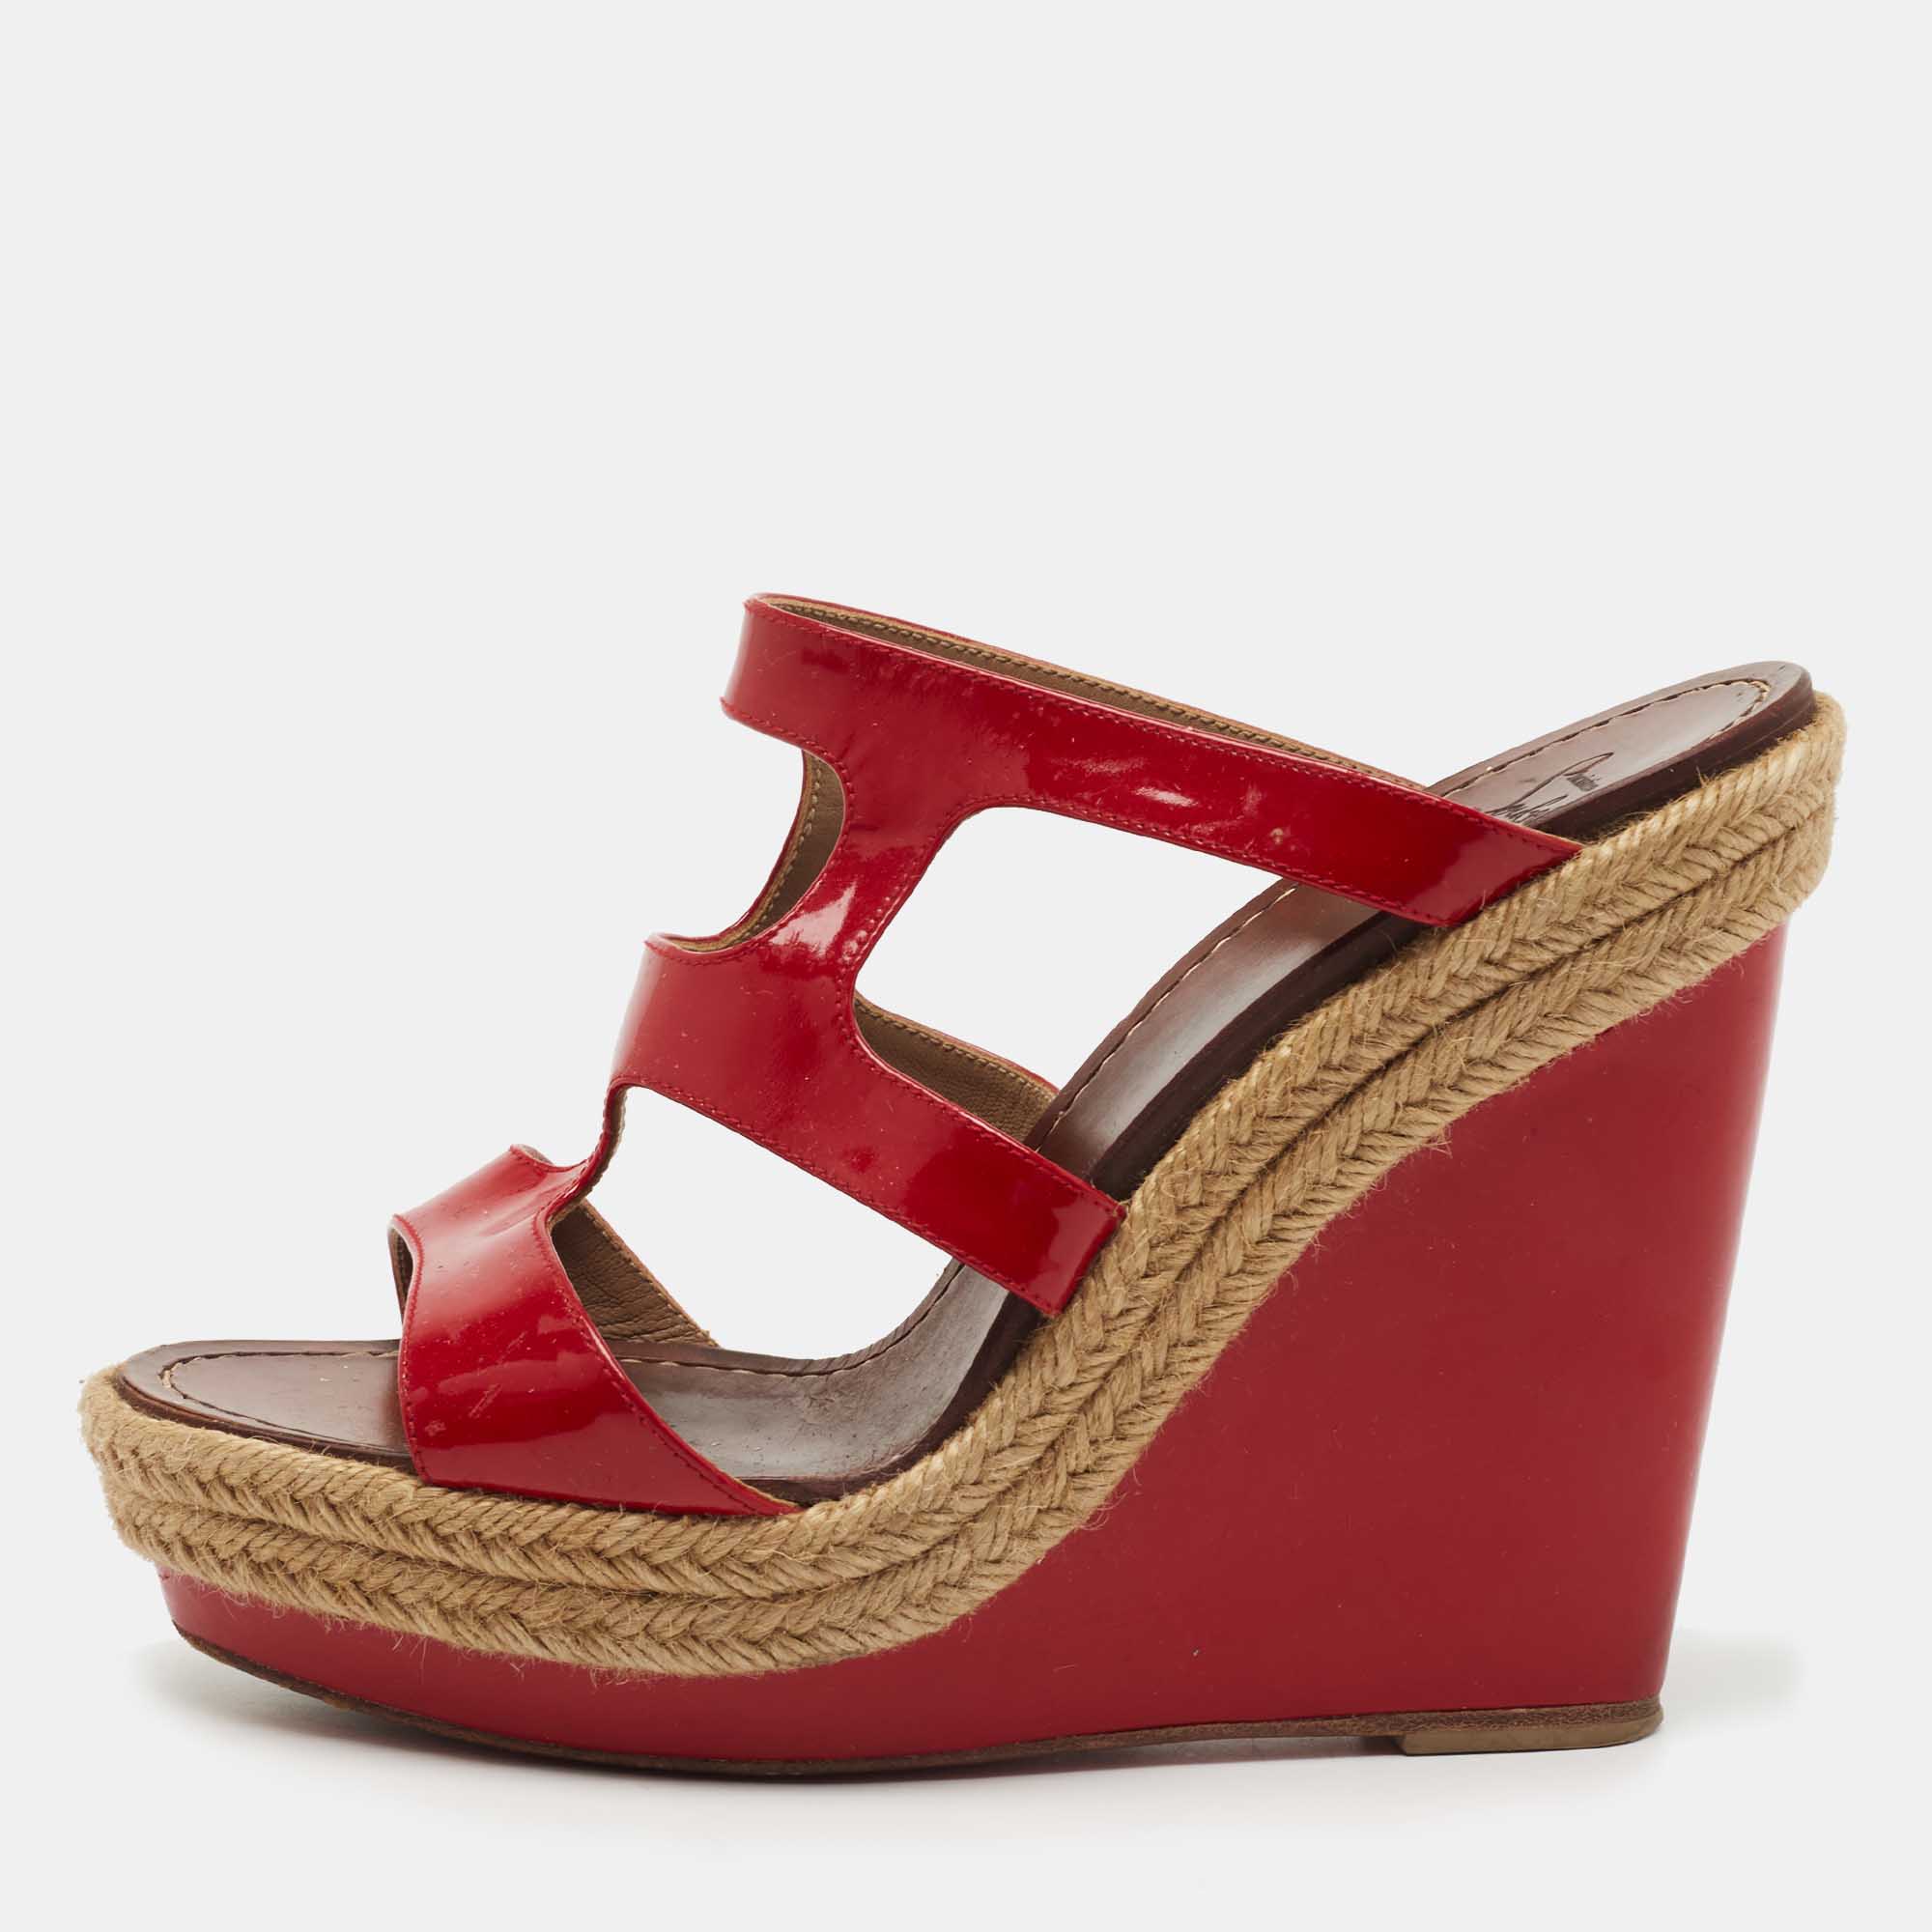 Christian Louboutin Red Patent Bilbao 120 Wedge Espadrilles Sandals Size 40